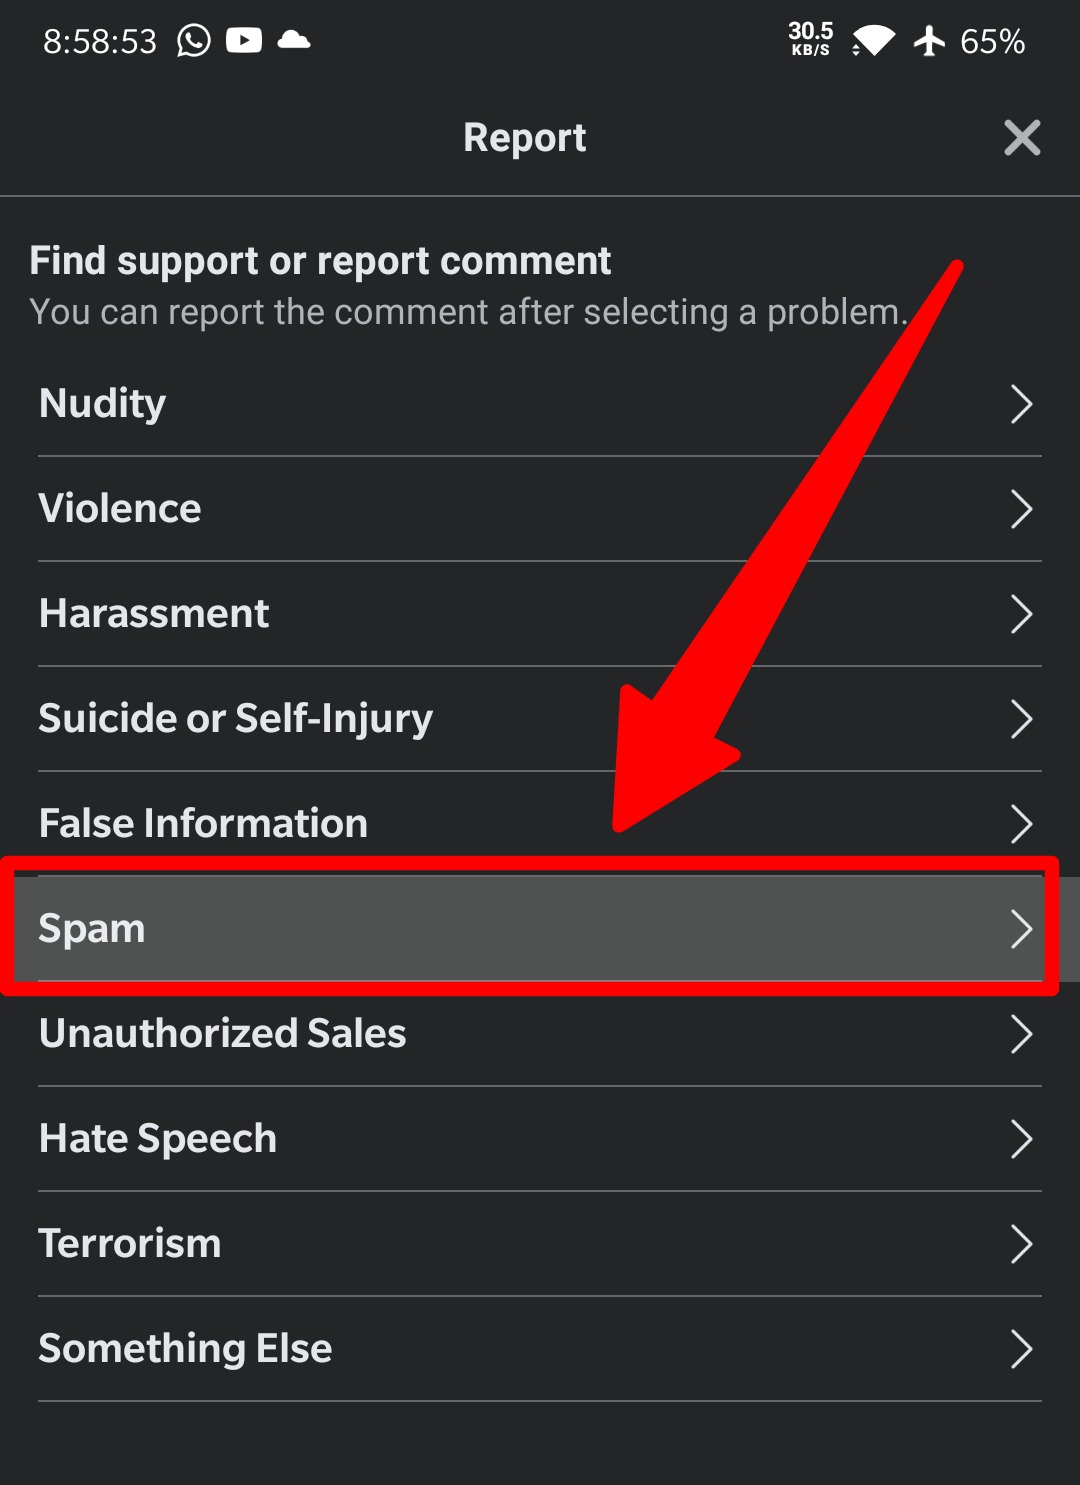 select Spam option on report screen